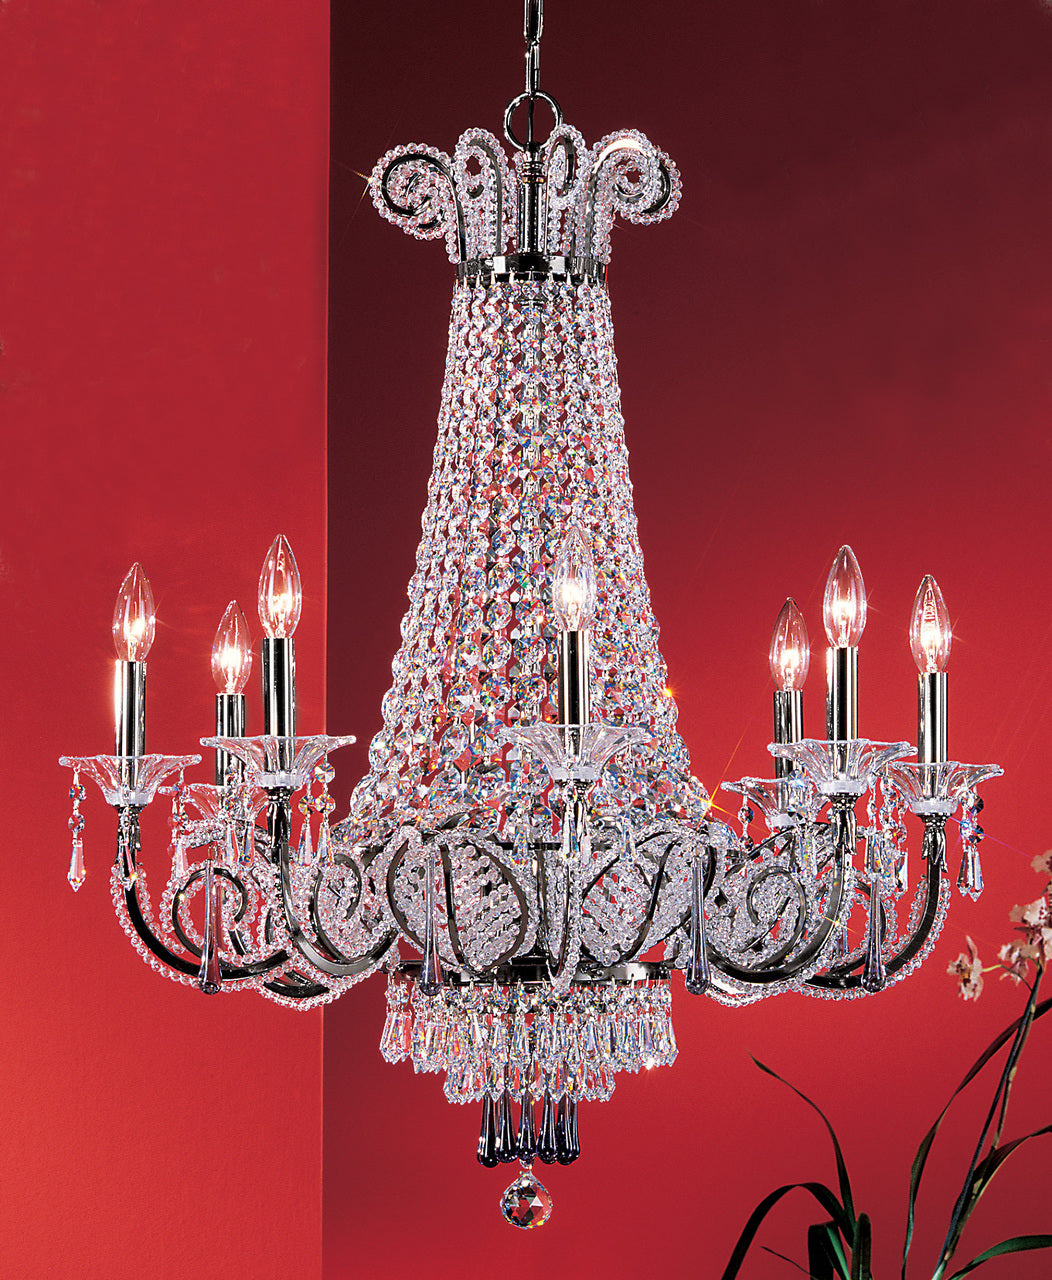 Classic Lighting 69758 EP DCL S Beaded Leaf Crystal Chandelier in Ebony Pearl